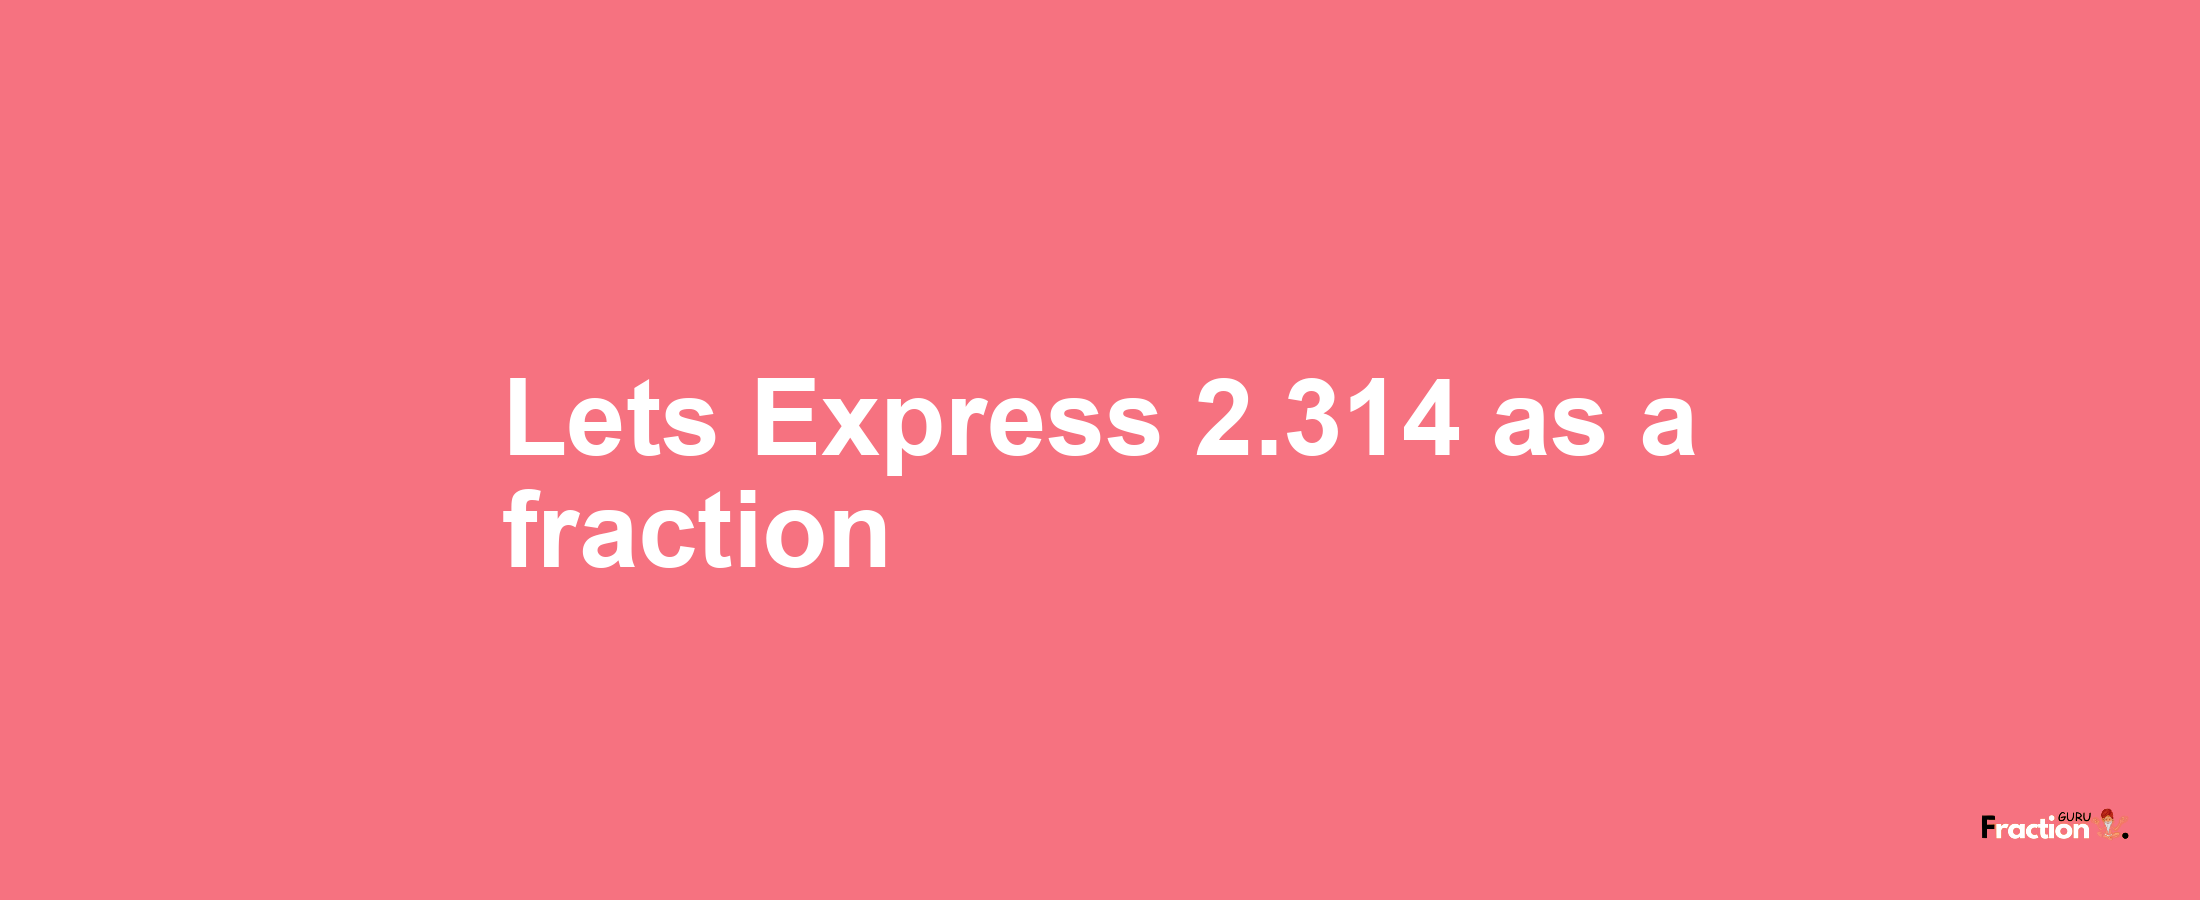 Lets Express 2.314 as afraction